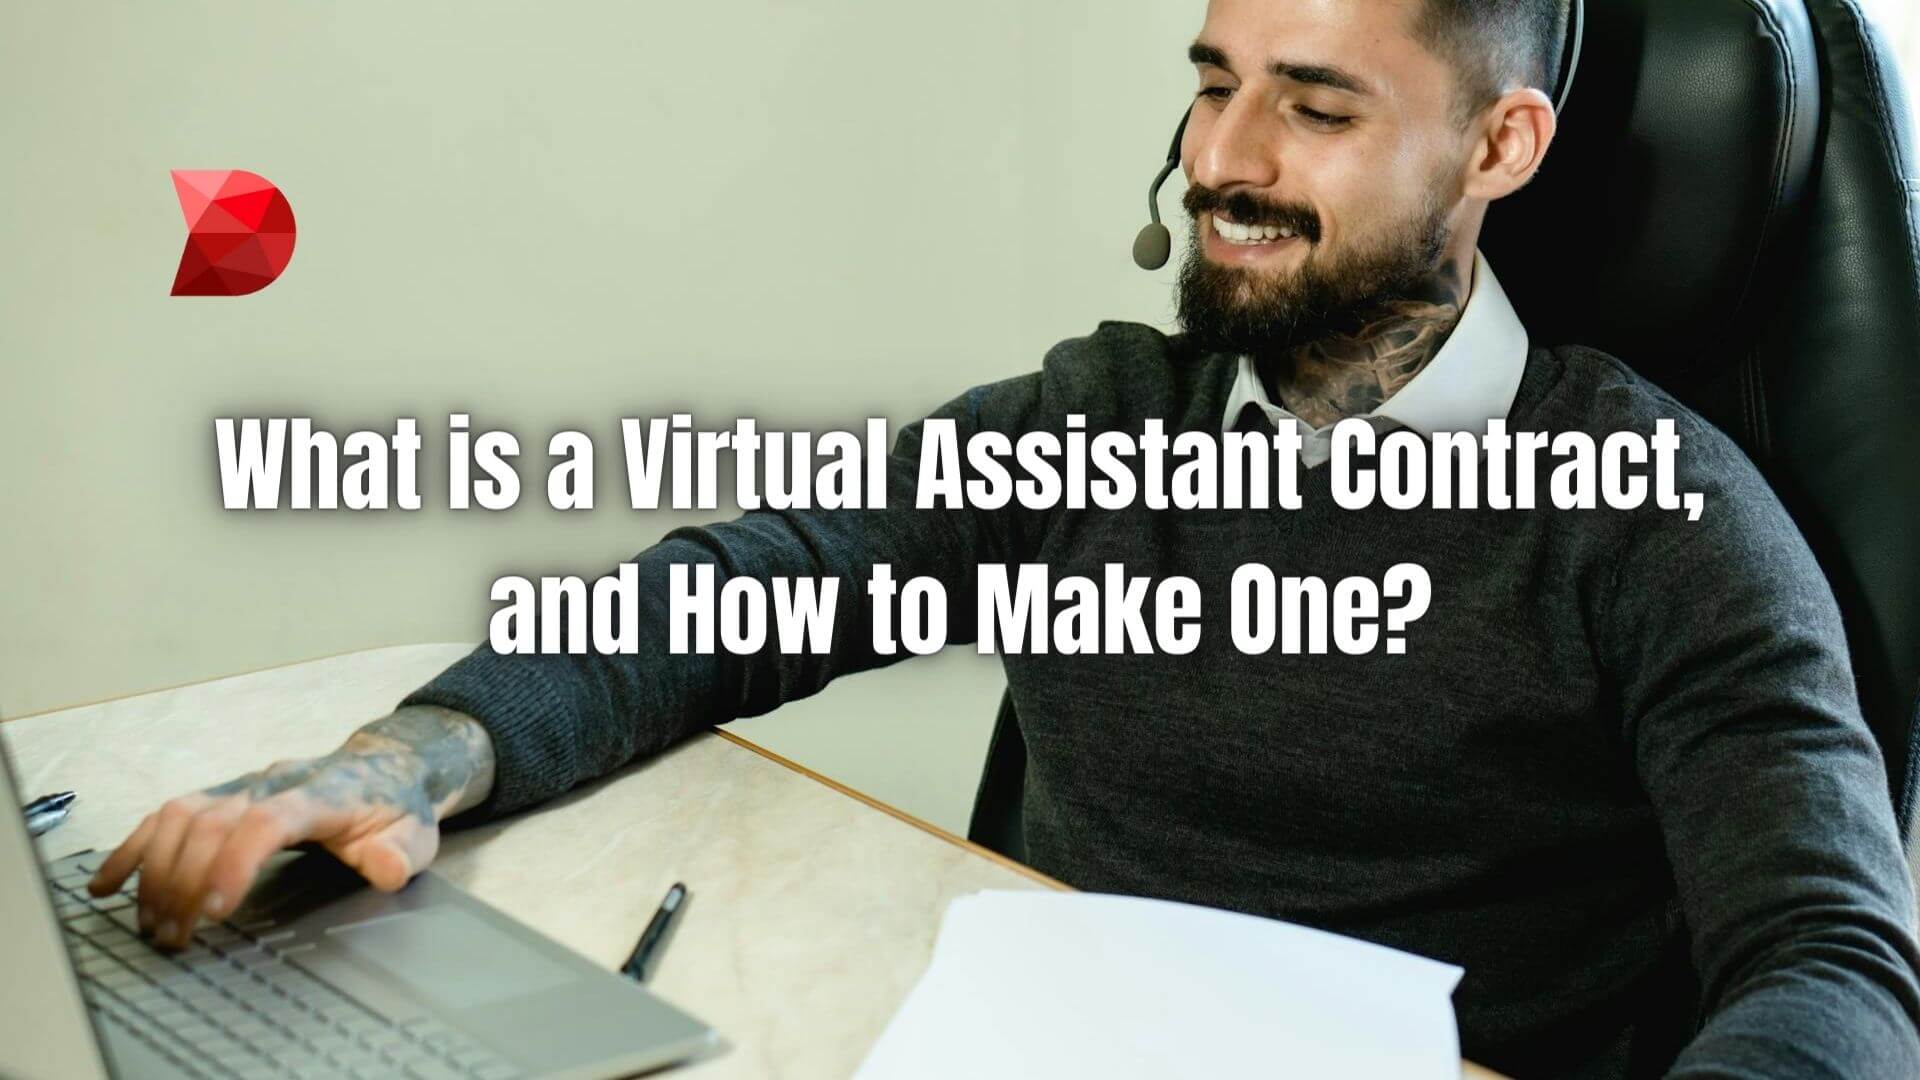 Create a virtual assistant contract template effortlessly with our guide. Click here to learn the ins and outs of drafting contracts effectively.